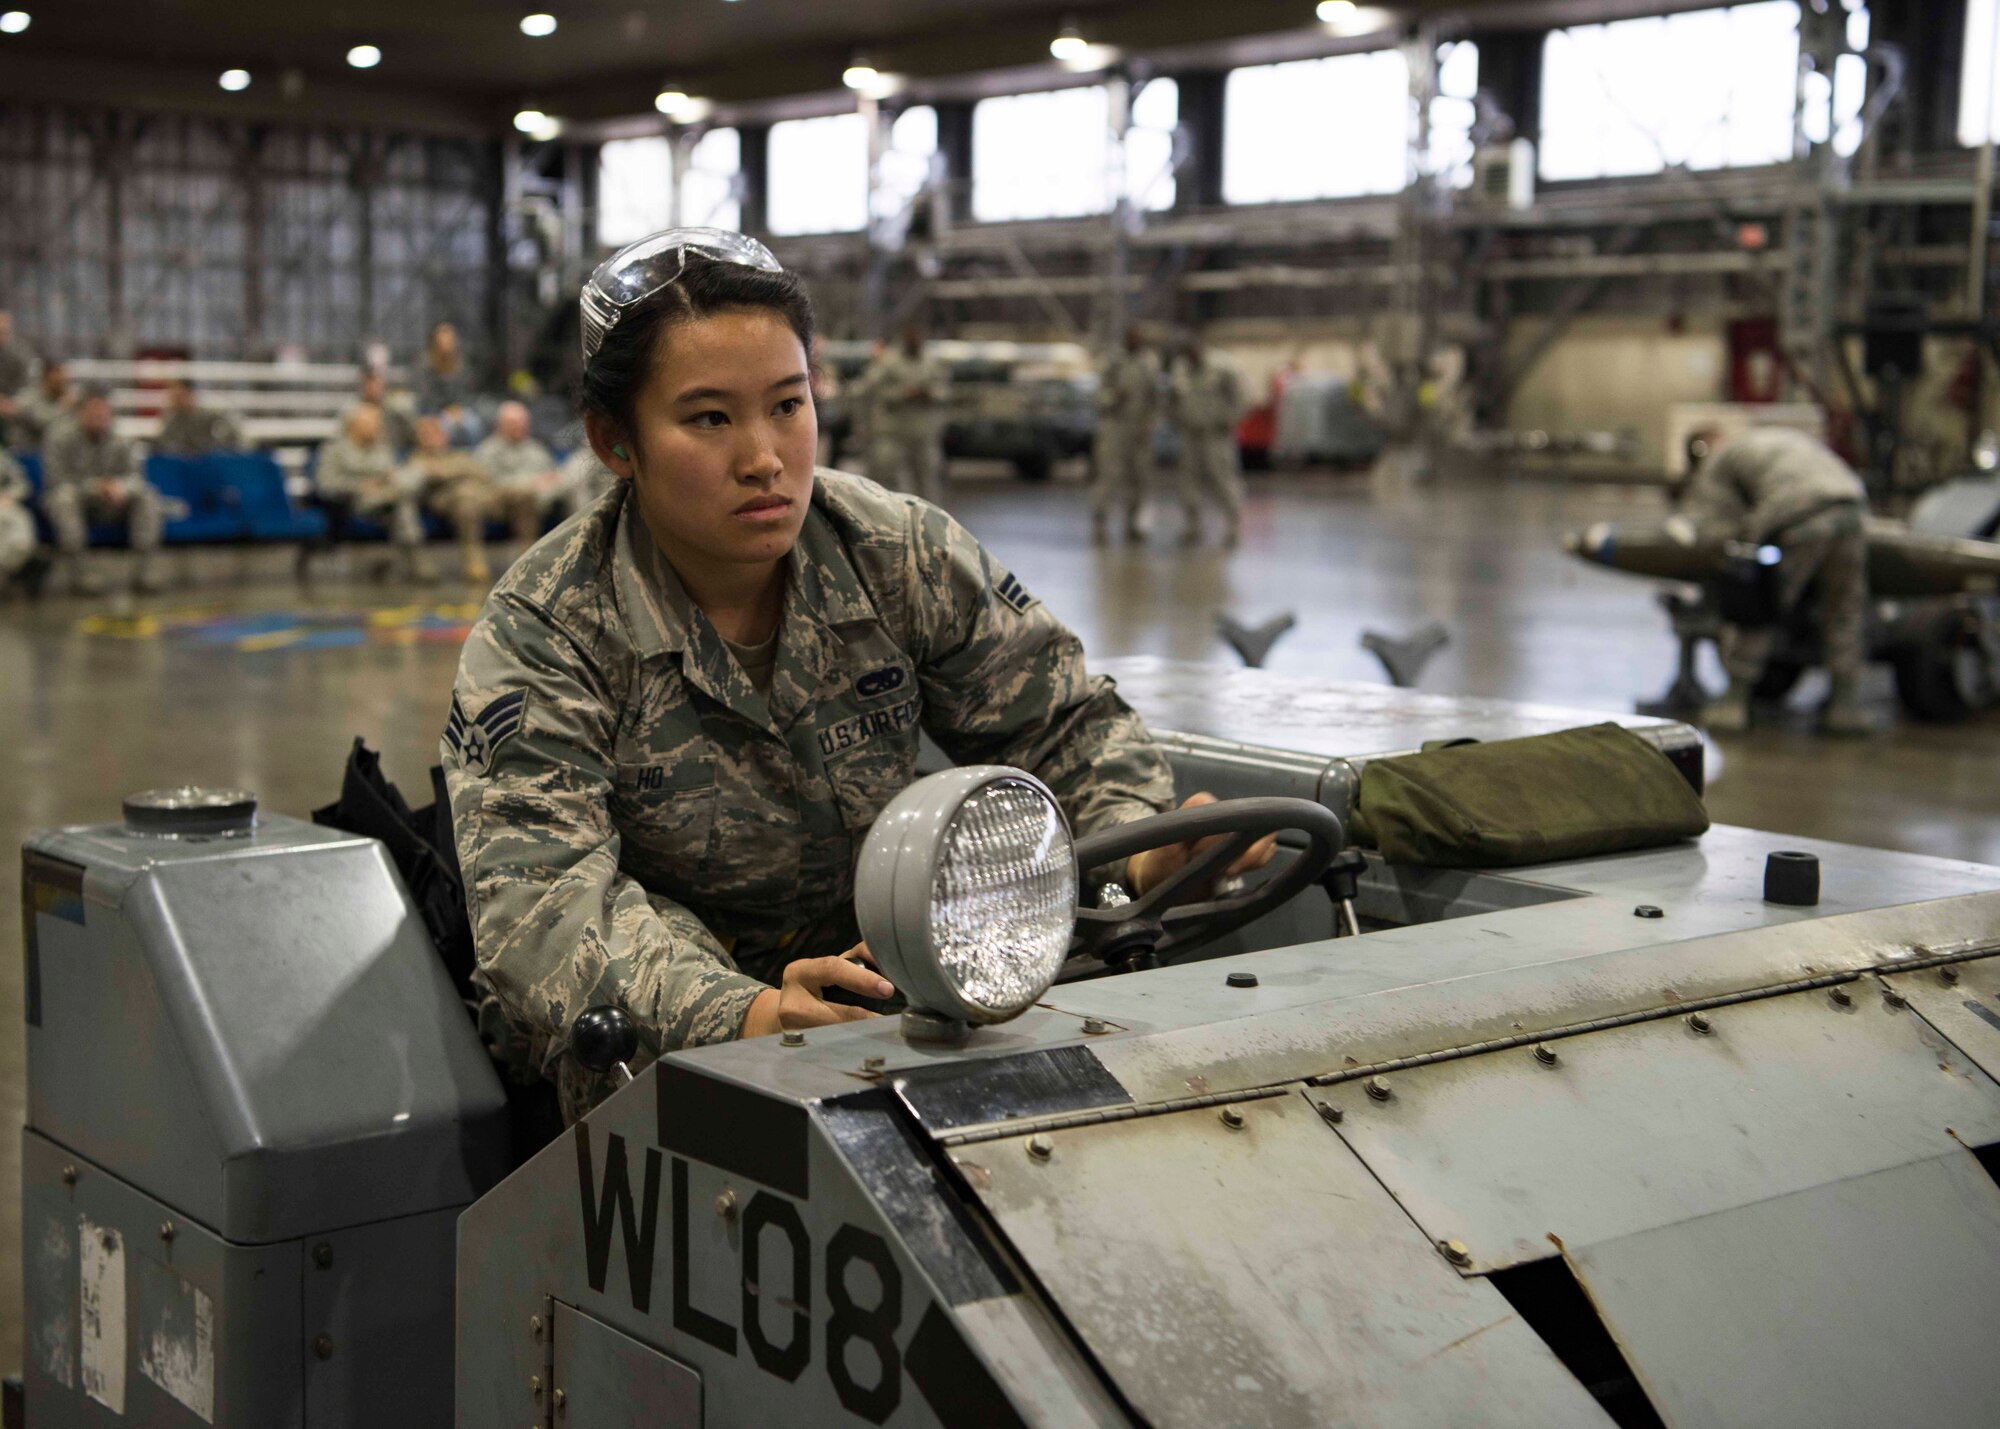 U.S. Air Force Senior Airman Jessica Ho, a 14th Aircraft Maintenance Unit load crew member, drives a MJ-1 standard lift truck during the third quarter load competition at Misawa Air Base, Japan, Nov. 9, 2018. Airmen use this rear-steered transportation device to align bomb lugs into the bomb rack hooks on F-16 Fighting Falcons, requiring absolute concentration and attention to detail to prevent aircraft damage while racing against the clock. (U.S. Air Force photo by Airman 1st Class Collette Brooks)